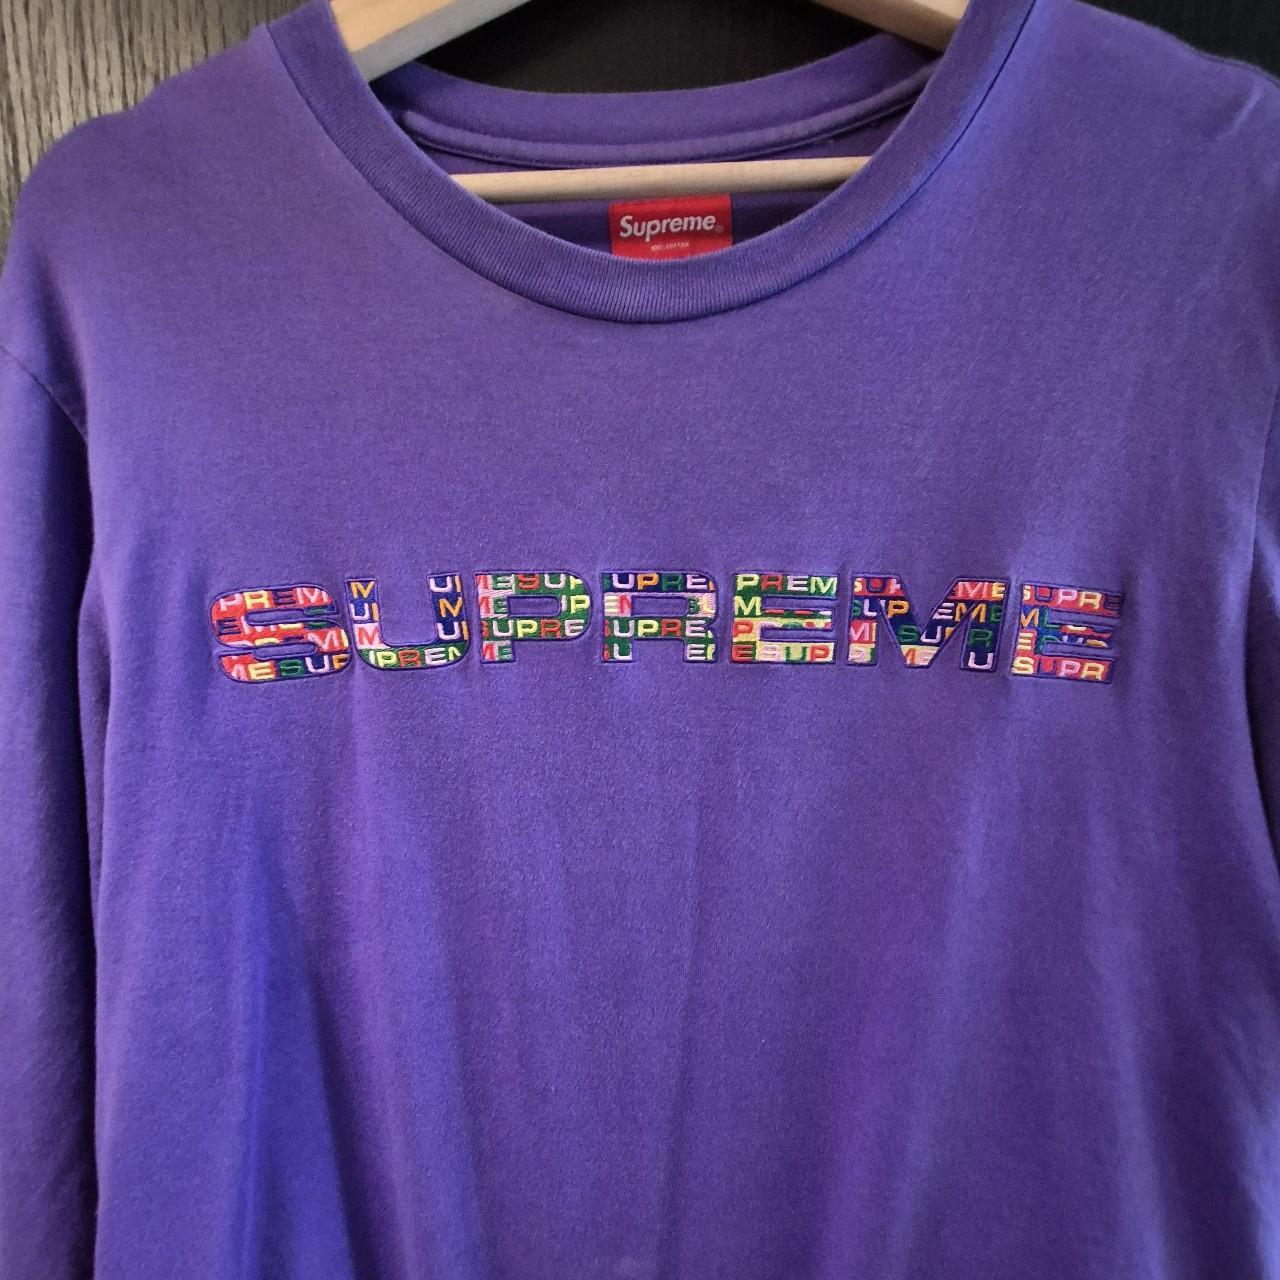 S/S20 Supreme Meta Logo Longsleeve size M(also fits...